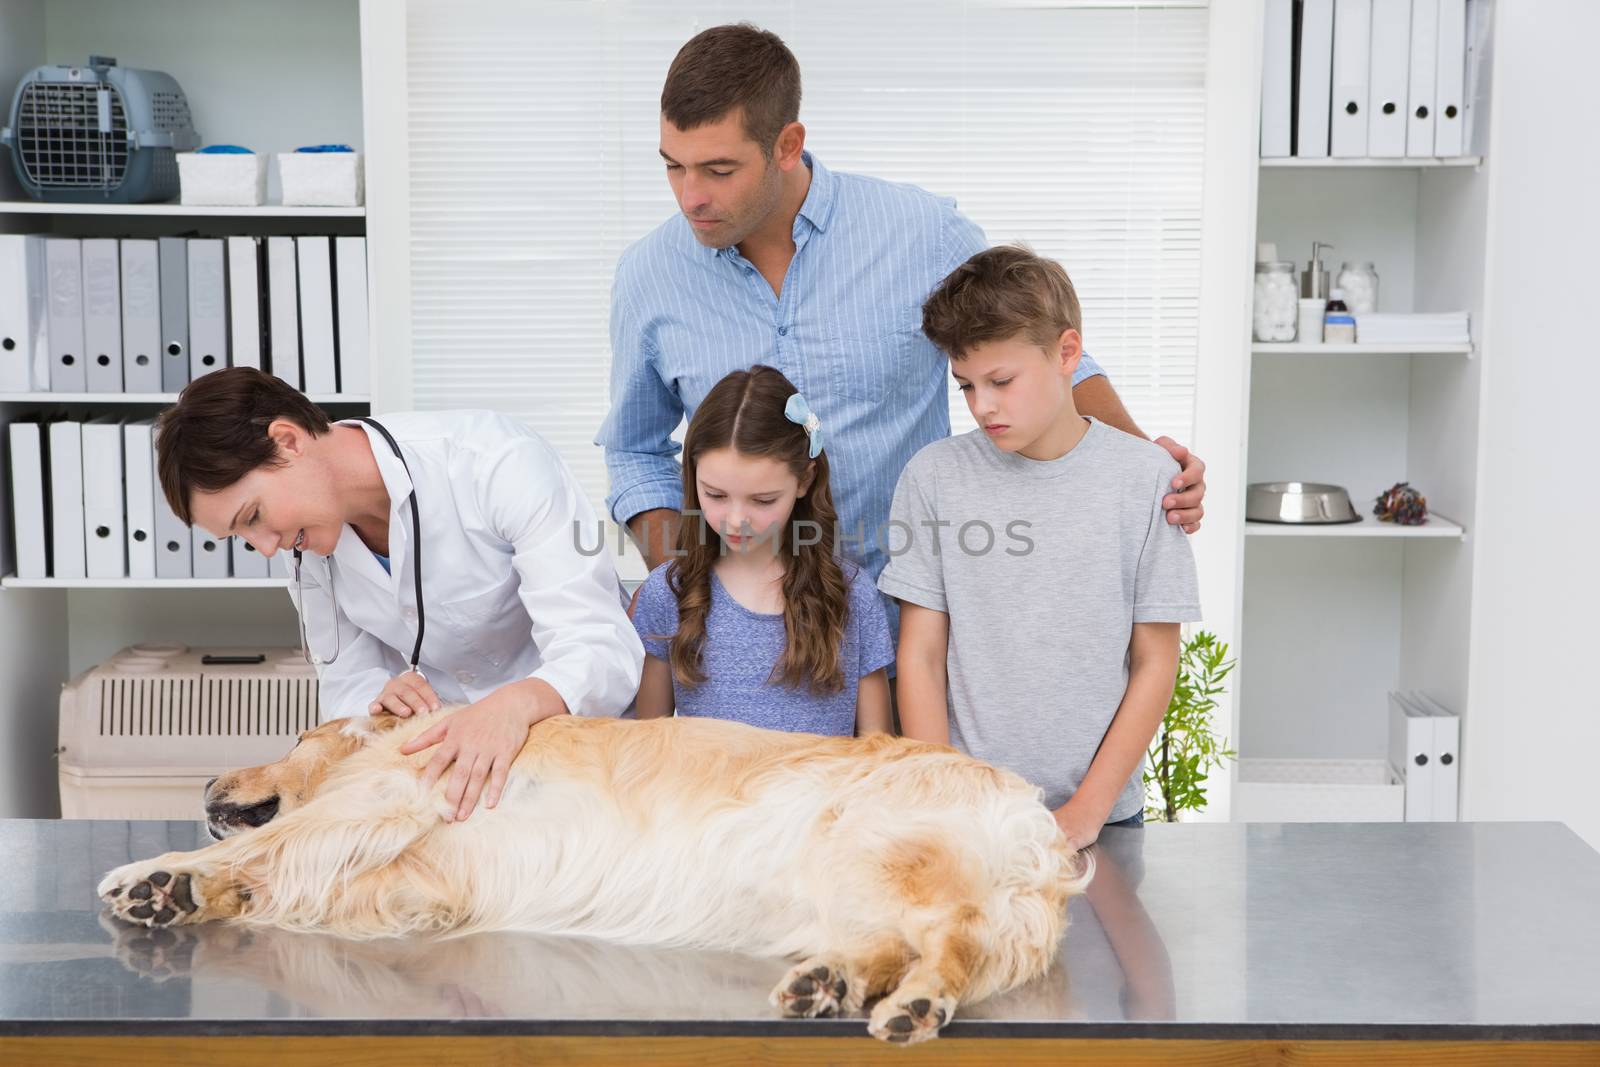 Smiling vet examining a dog with its scared owners in medical office